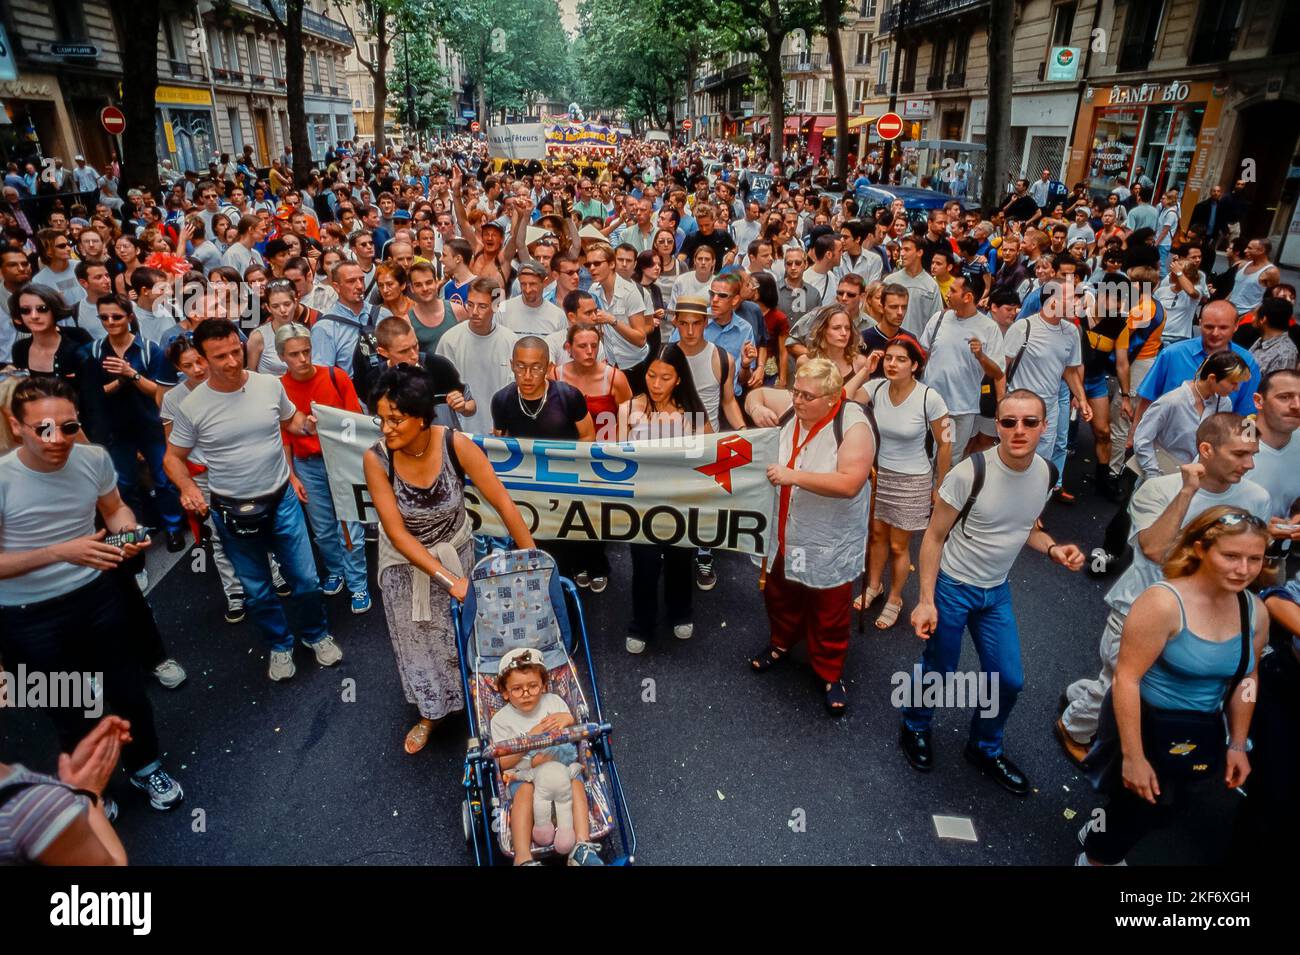 Paris, France, Crowd , AIDES NGO, Aids Activists Protesting  with Signs at Gay Pride, LGBTQI+, aids 1990s Stock Photo